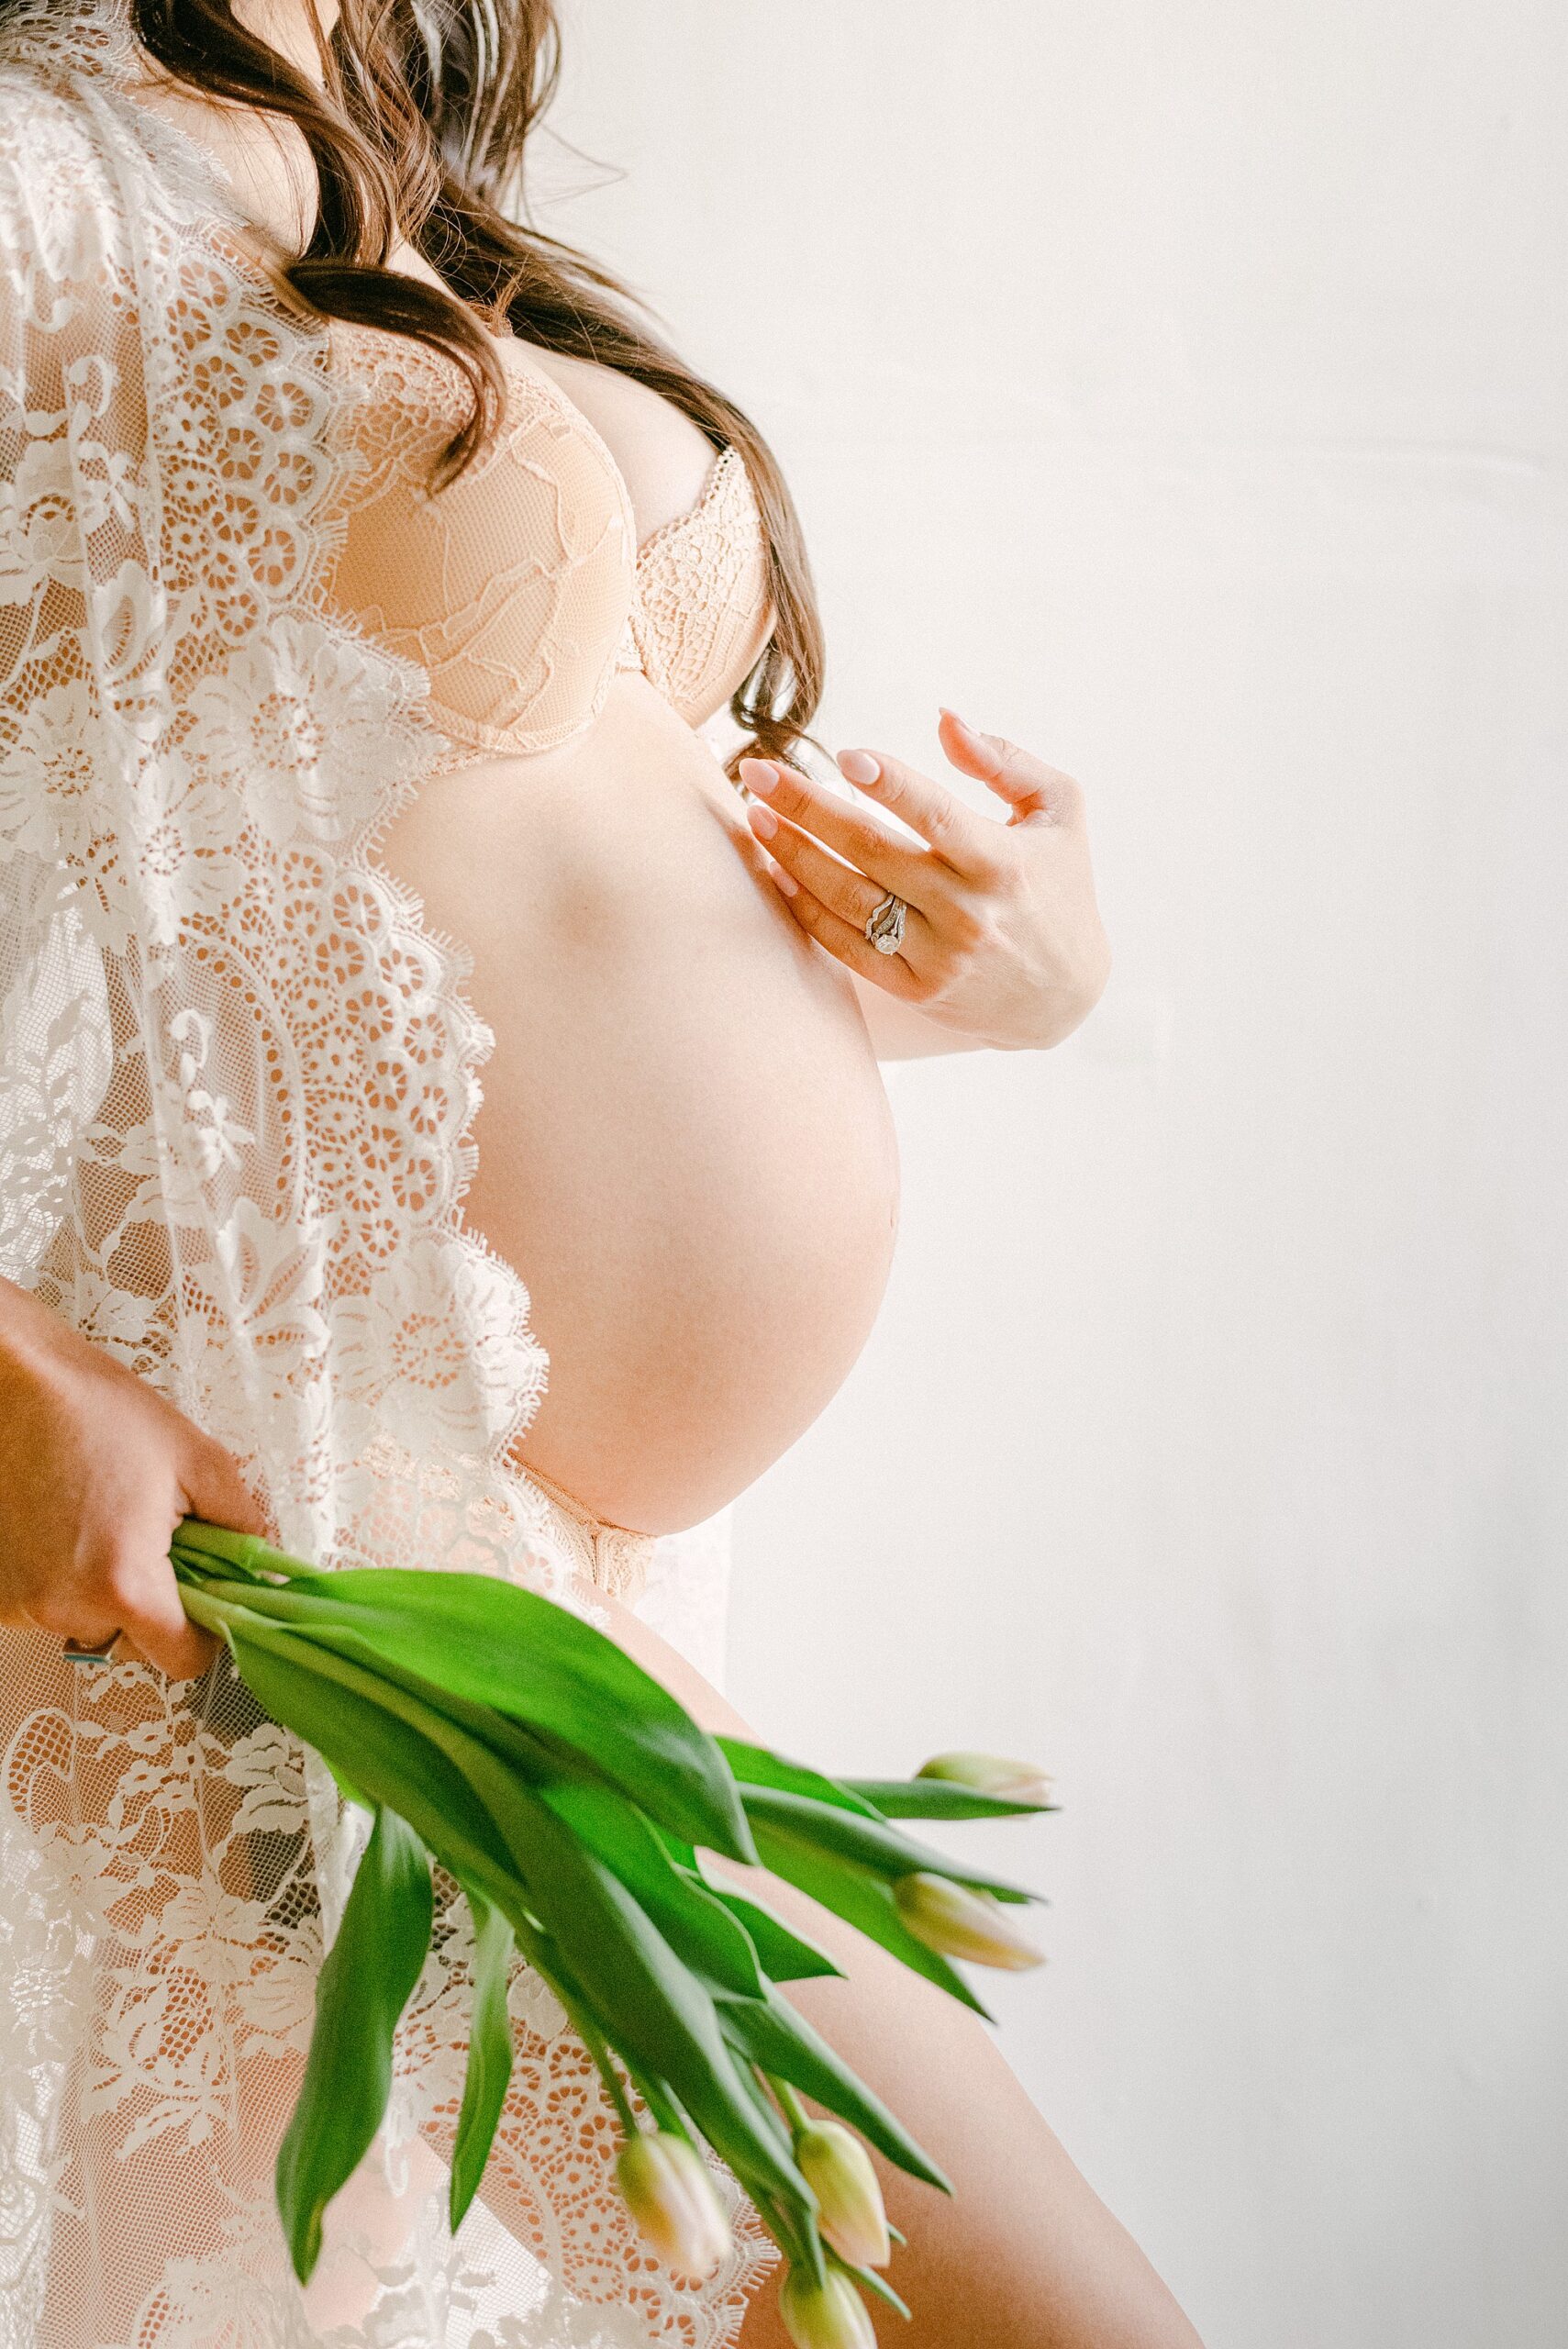 Expecting mother holding tulips next to baby bump. She's wearing a white queen anne lace rob with fingers tracing baby bump